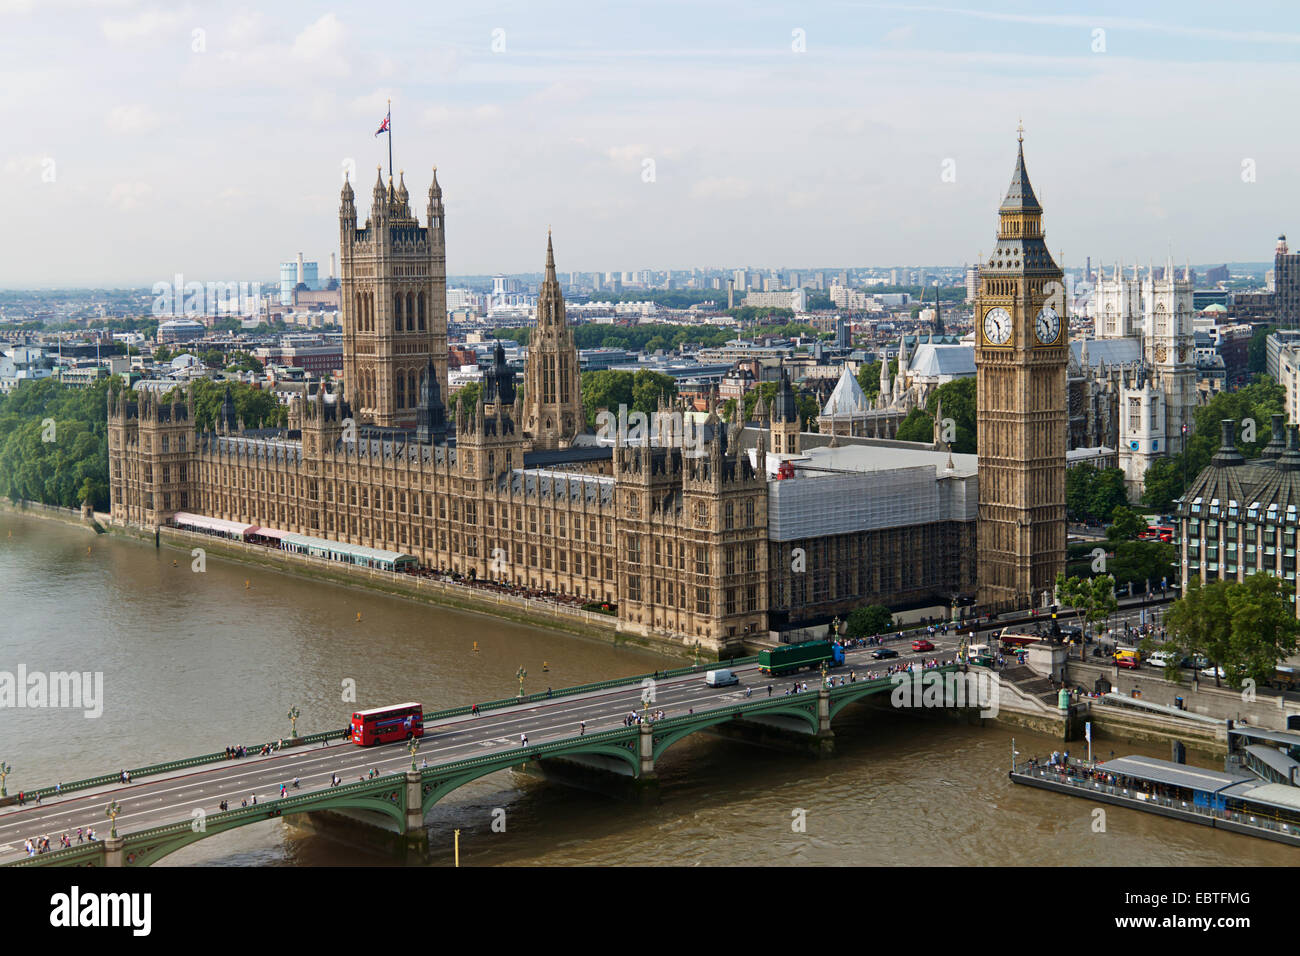 Palace of Westminster, die Houses of Parliament und Big Ben, United Kingdom, England, London Stockfoto